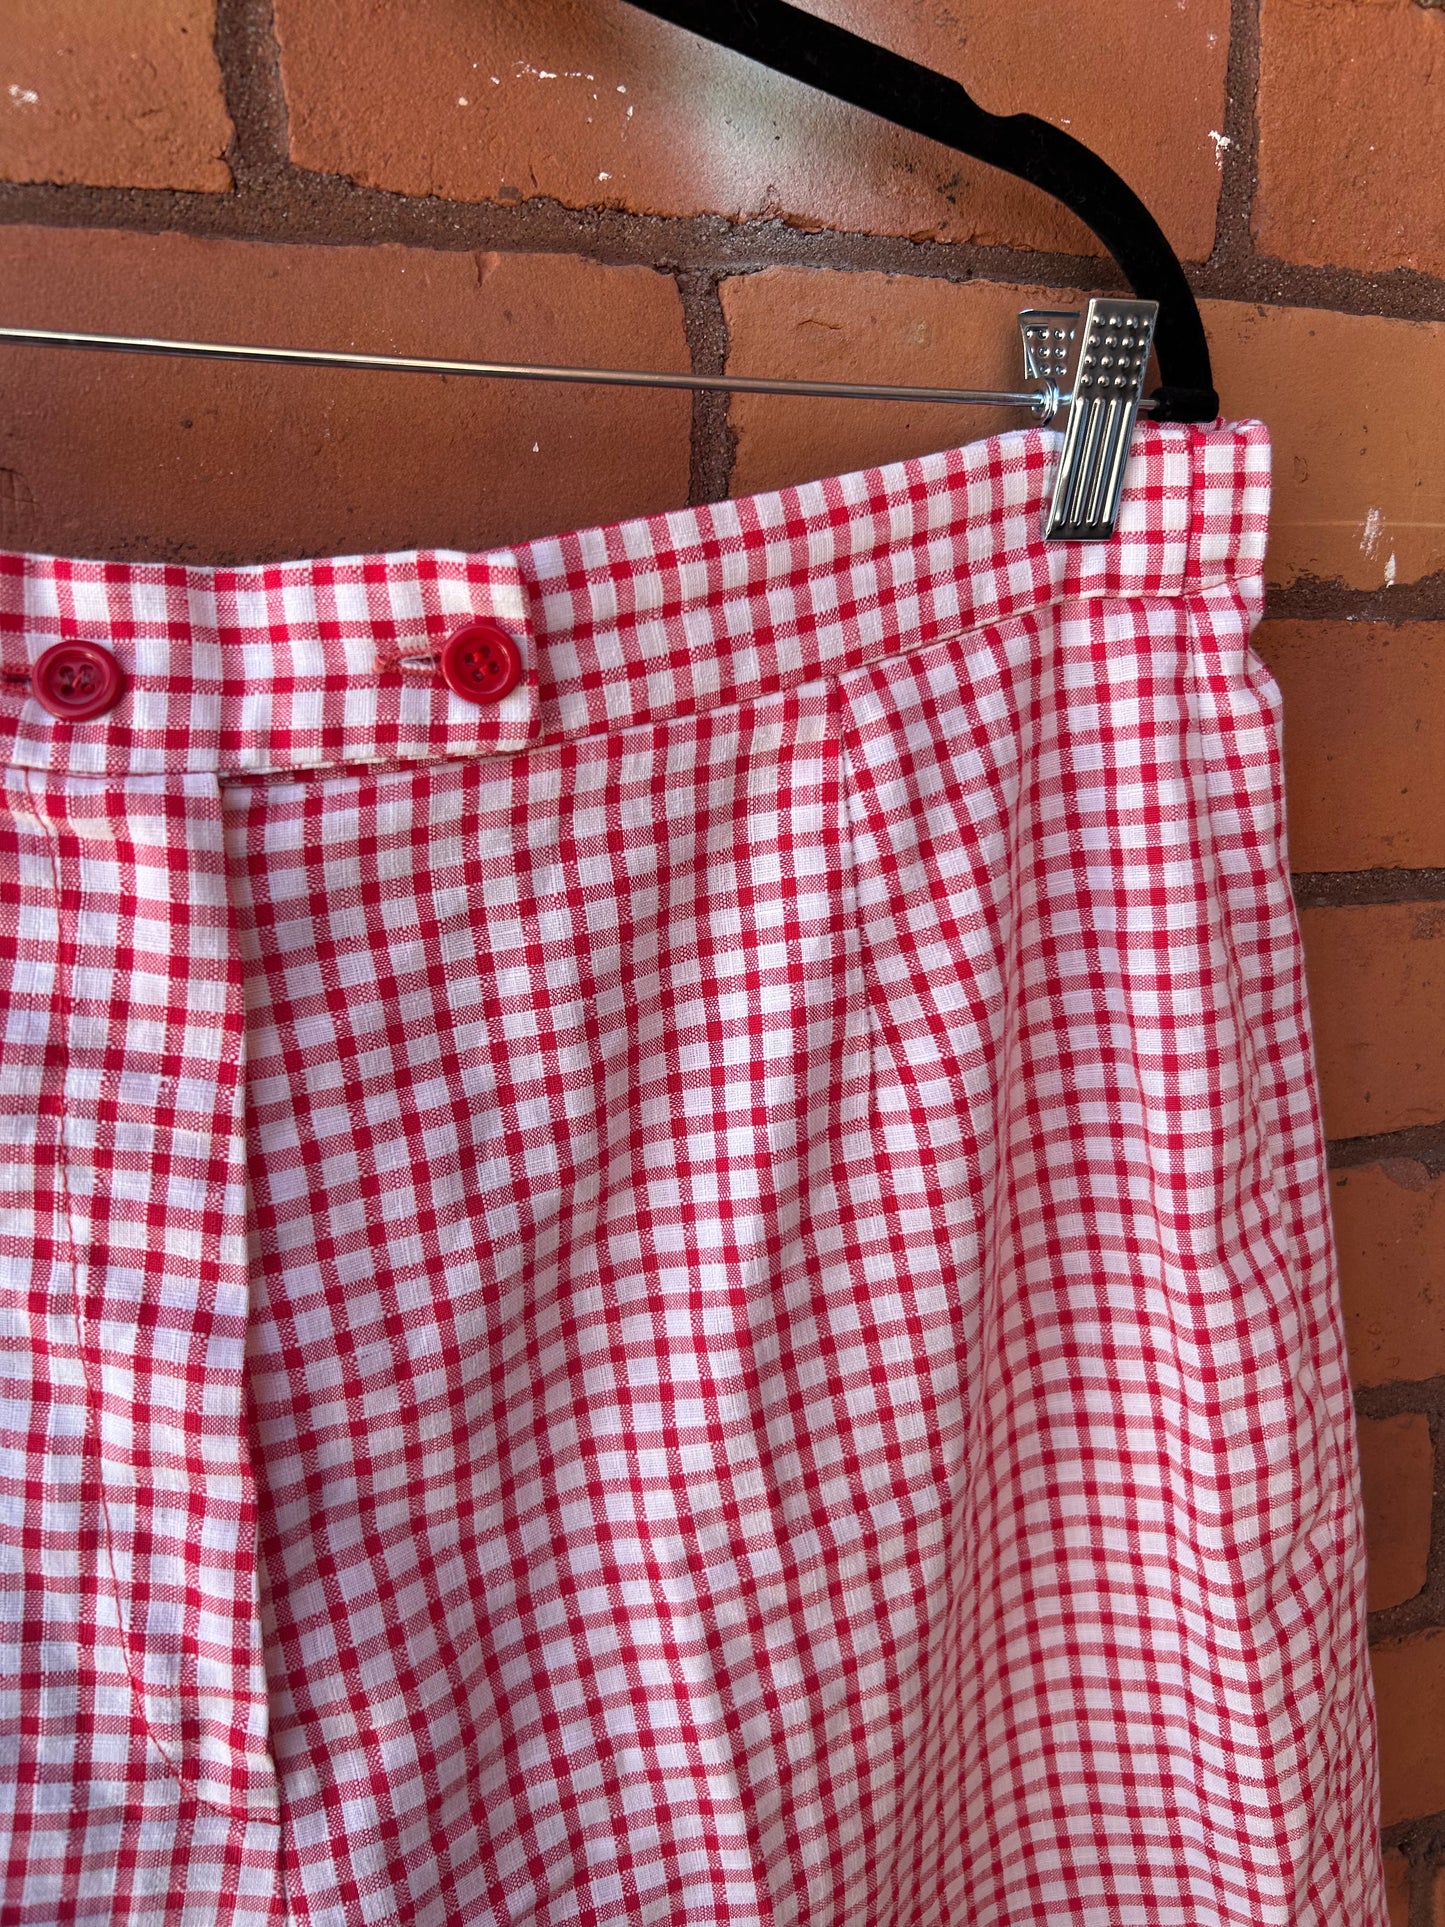 90’s Vintage Red & White Gingham Cotton Shorts / 34-36 Waist